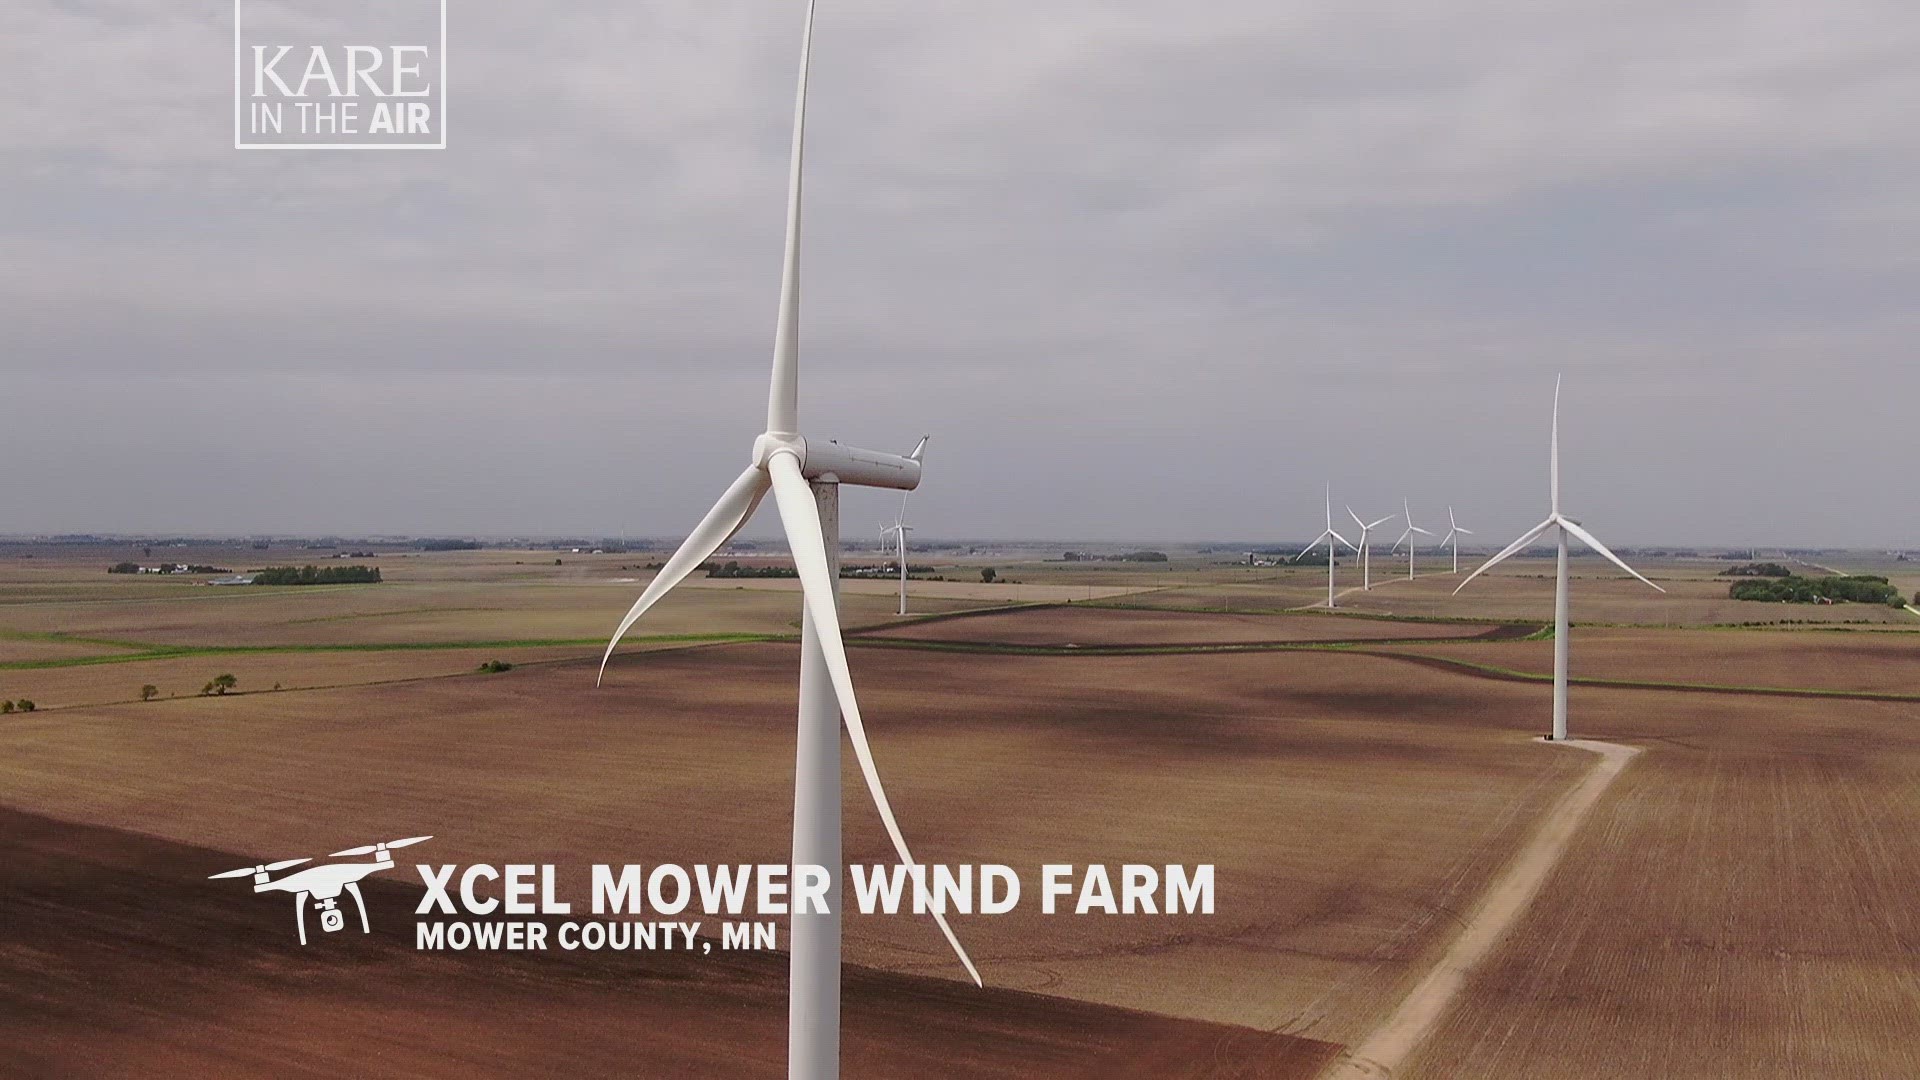 The farm consists of 43 individual turbines, each of which is taller than a 20-story building with three 172-foot blades.